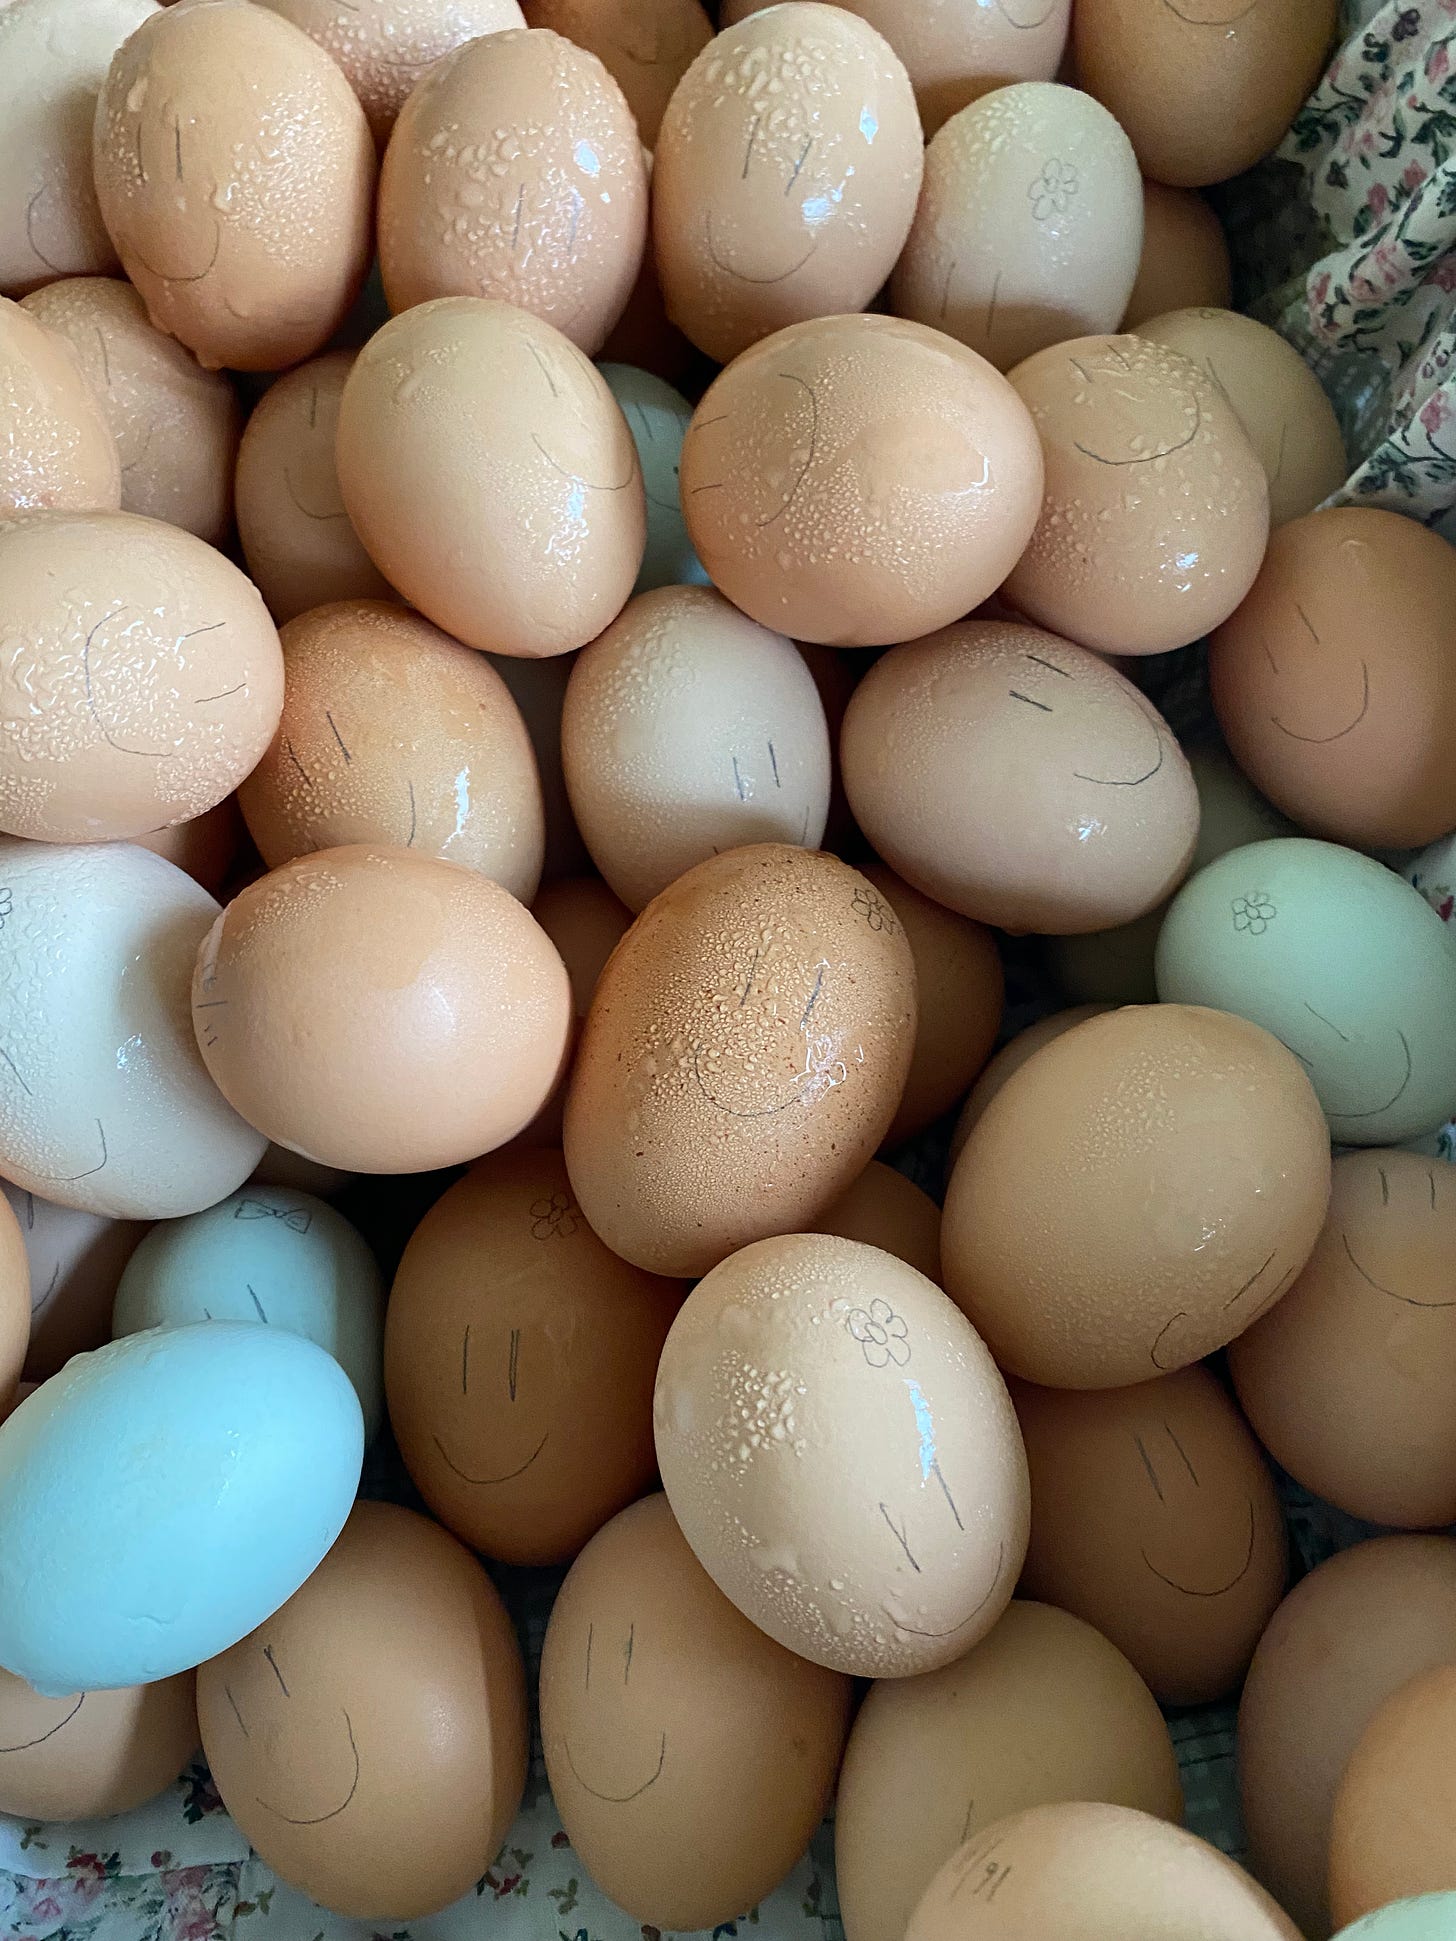 Eggs of varying sizes in hues of brown, white and blue in a basket. With happy faces =) drawn in pencil